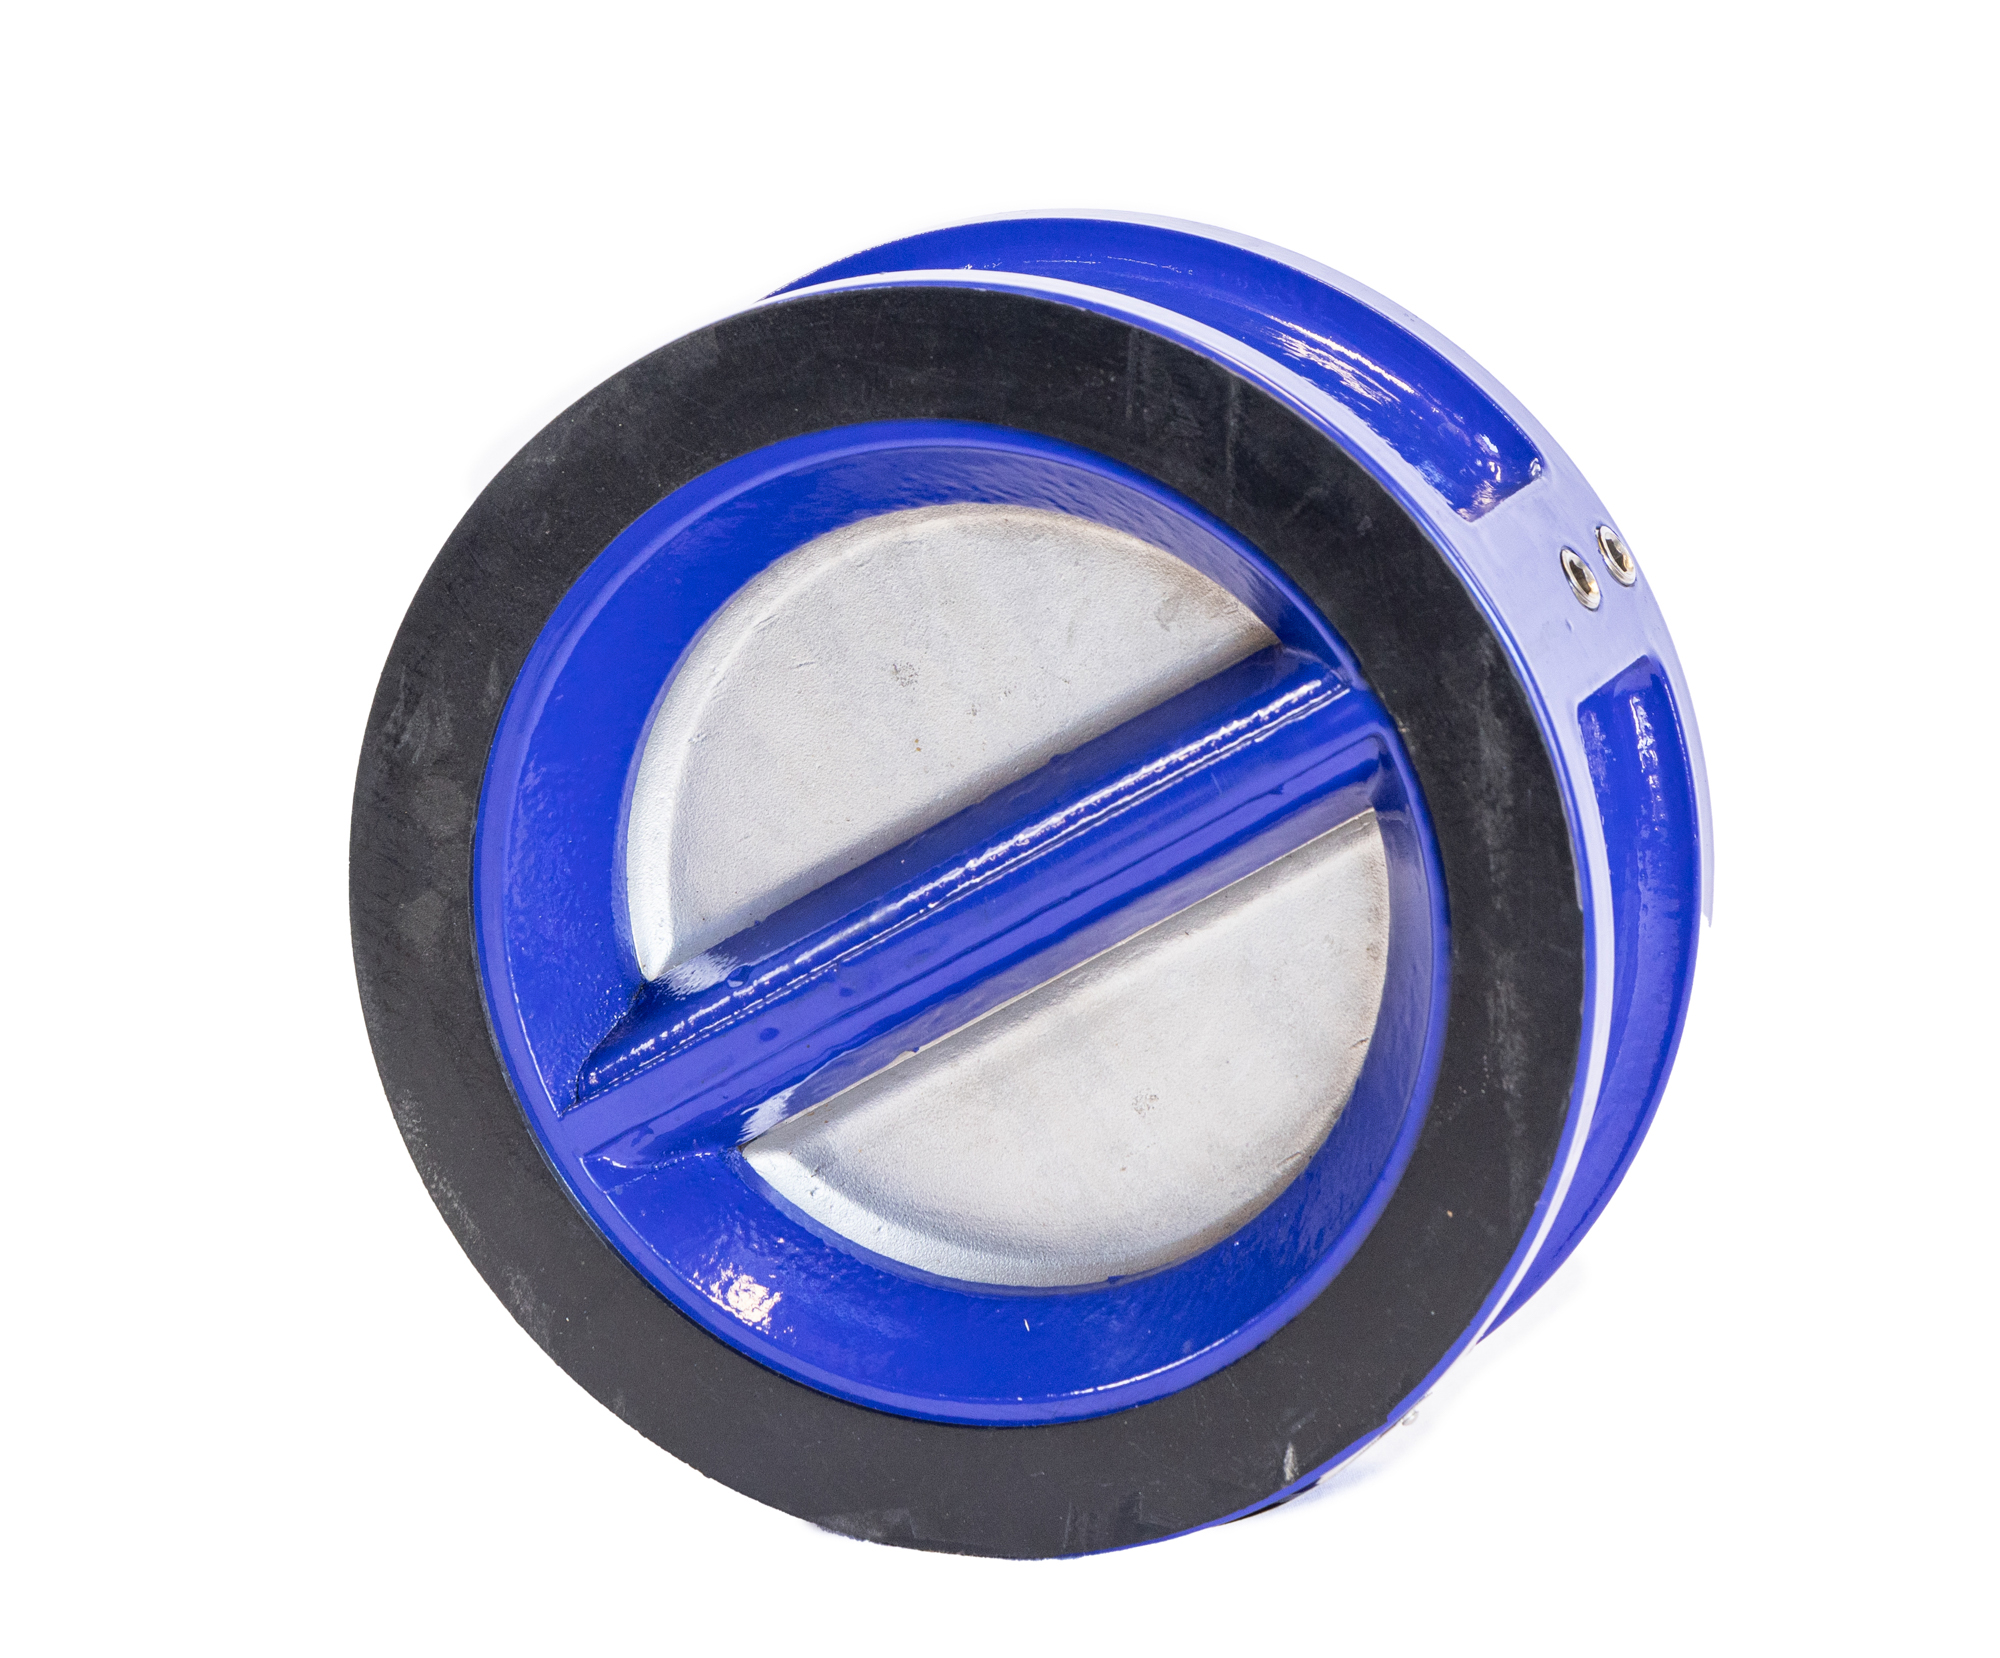 An image of a dual disc wafer check valve.